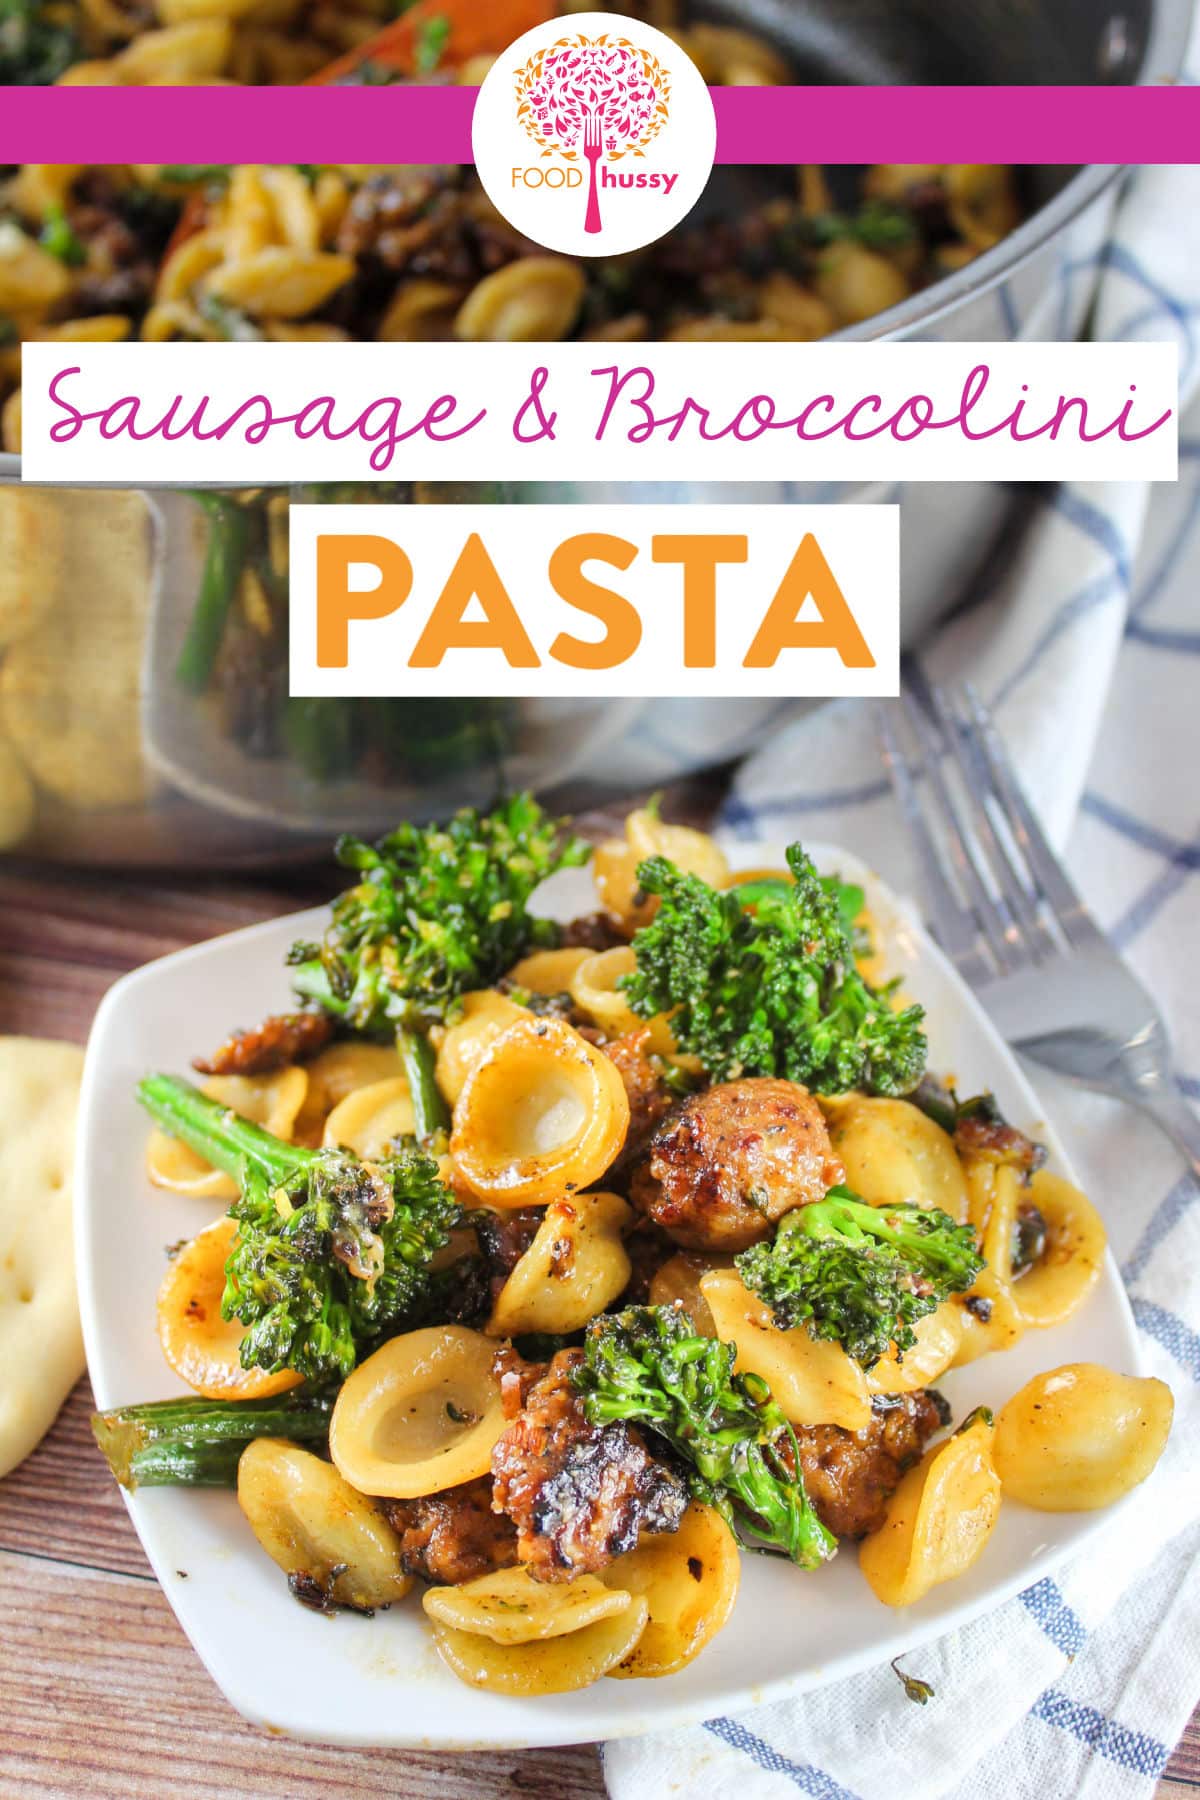 Italian Sausage and Broccolini Pasta is one of our favorite easy pasta dishes! In about 15 minutes, you'll have a bowl of delicious pasta lightly coated with Parmesan cheese and every bite will have juicy chunks of Italian Sausage and Broccolini!  via @foodhussy